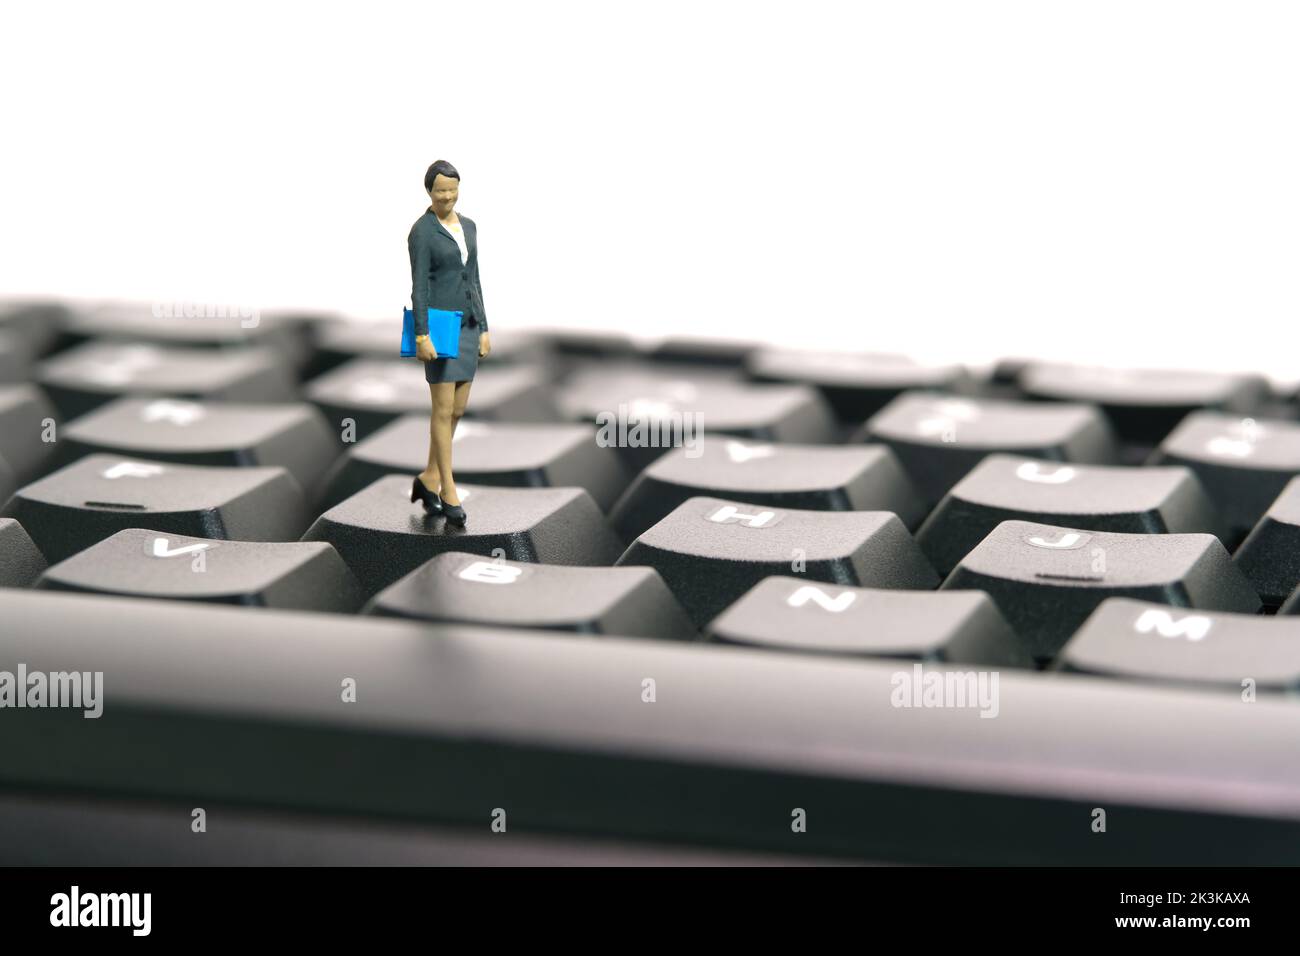 Miniature people toy figure photography. Typing job concept. A businesswoman standing above black keyboard. Isolated on white background. Image photo Stock Photo